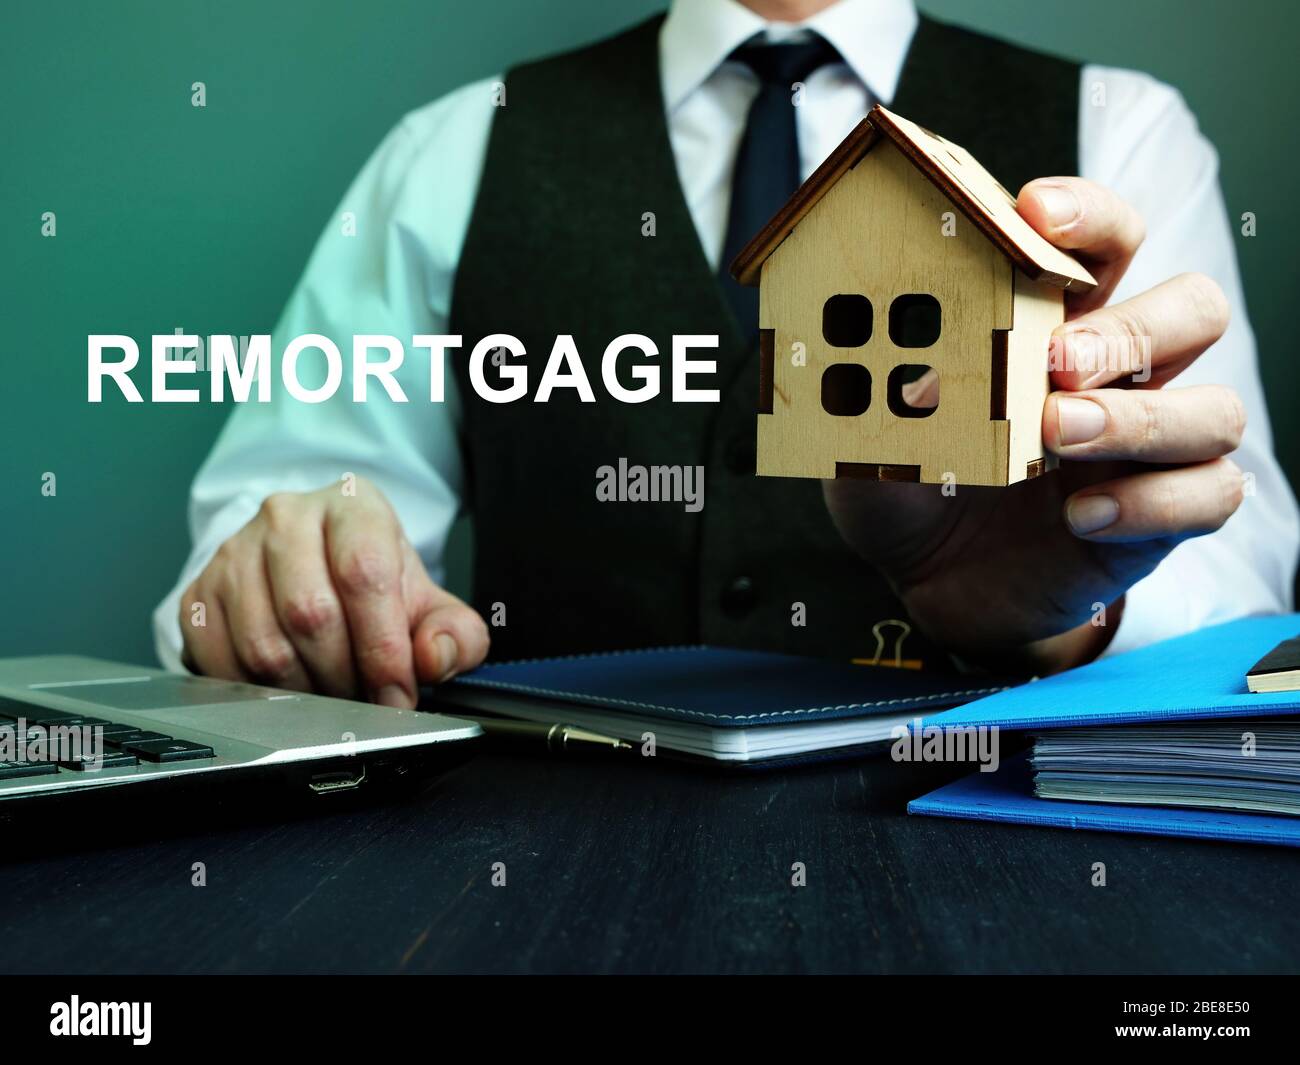 Man holds wooden home and sign remortgage. Stock Photo